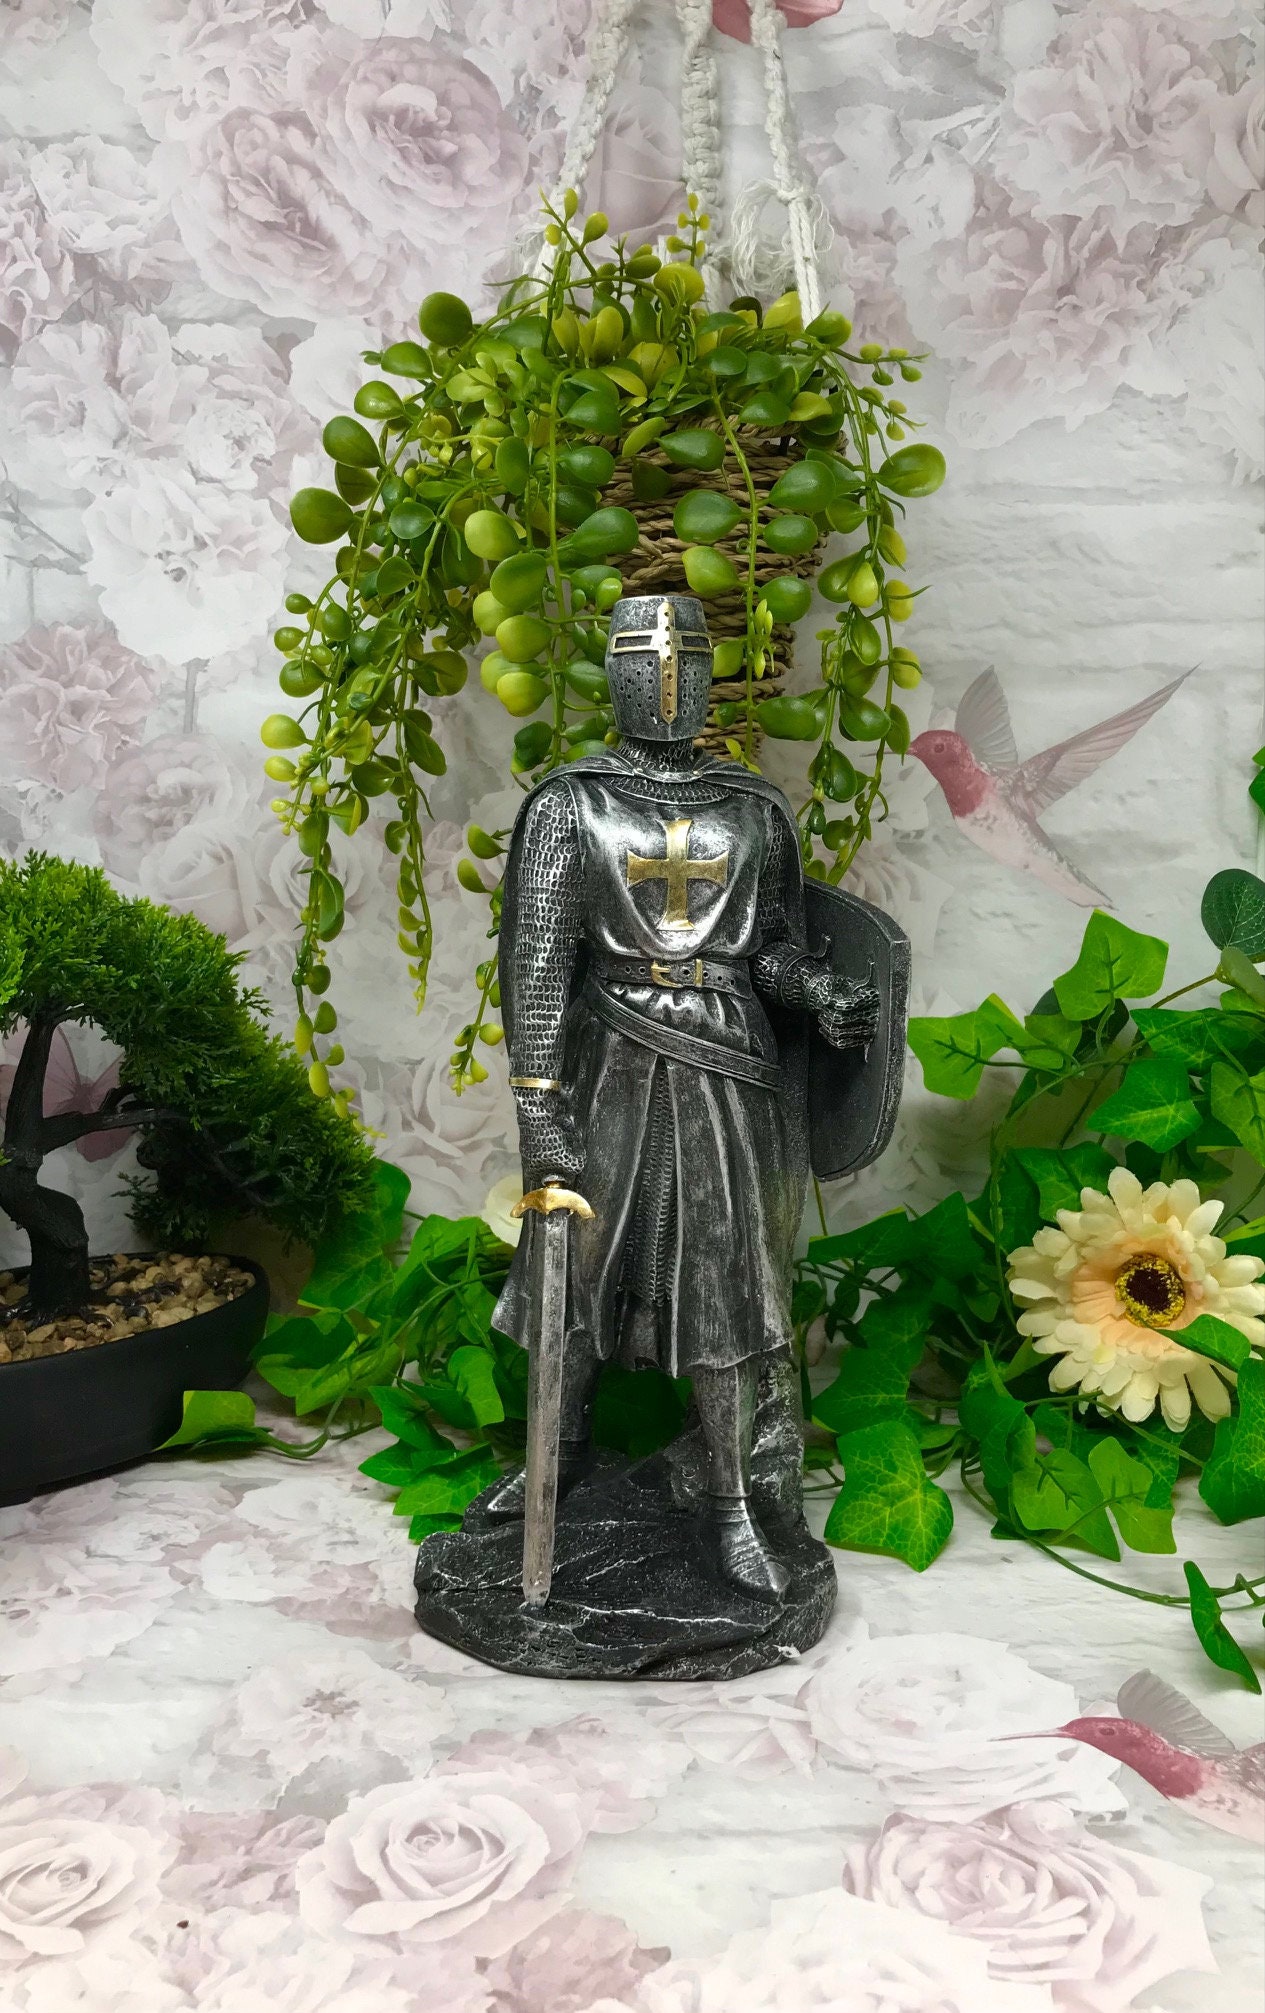 Dark Templar Knight Standing with Sword & Shield Statue Ornament Medieval Style Sculpture